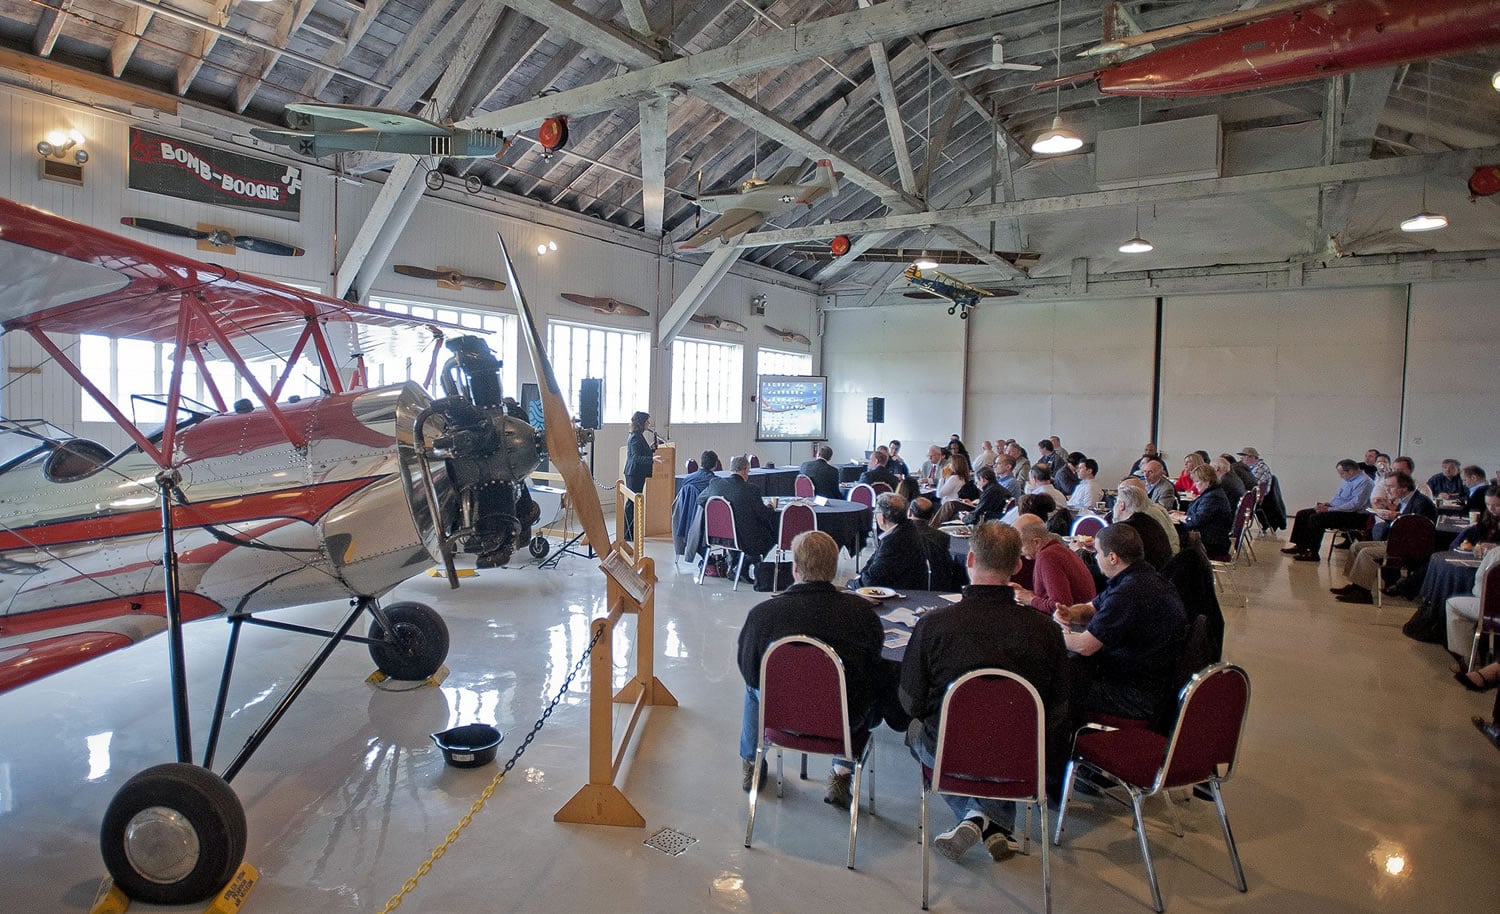 About 75 people attend a workshop Wednesday at Pearson Air Museum to learn how to do business with Boeing Co.